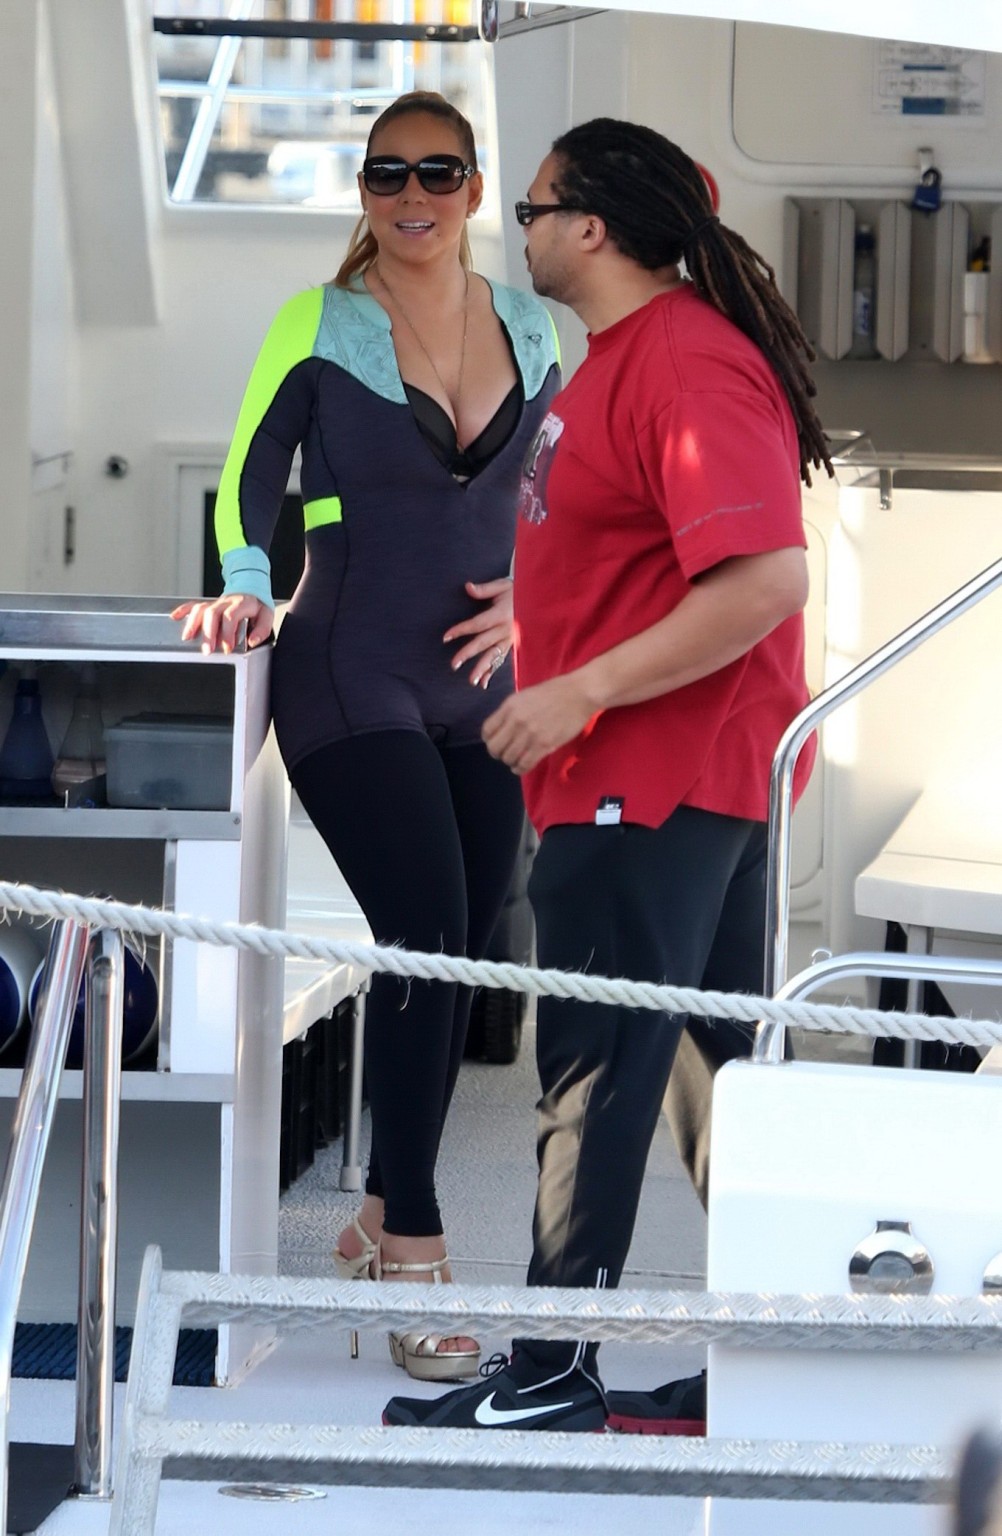 Busty Mariah Carey wearing bikini top and wet suit for a boat ride in Perth #75180599